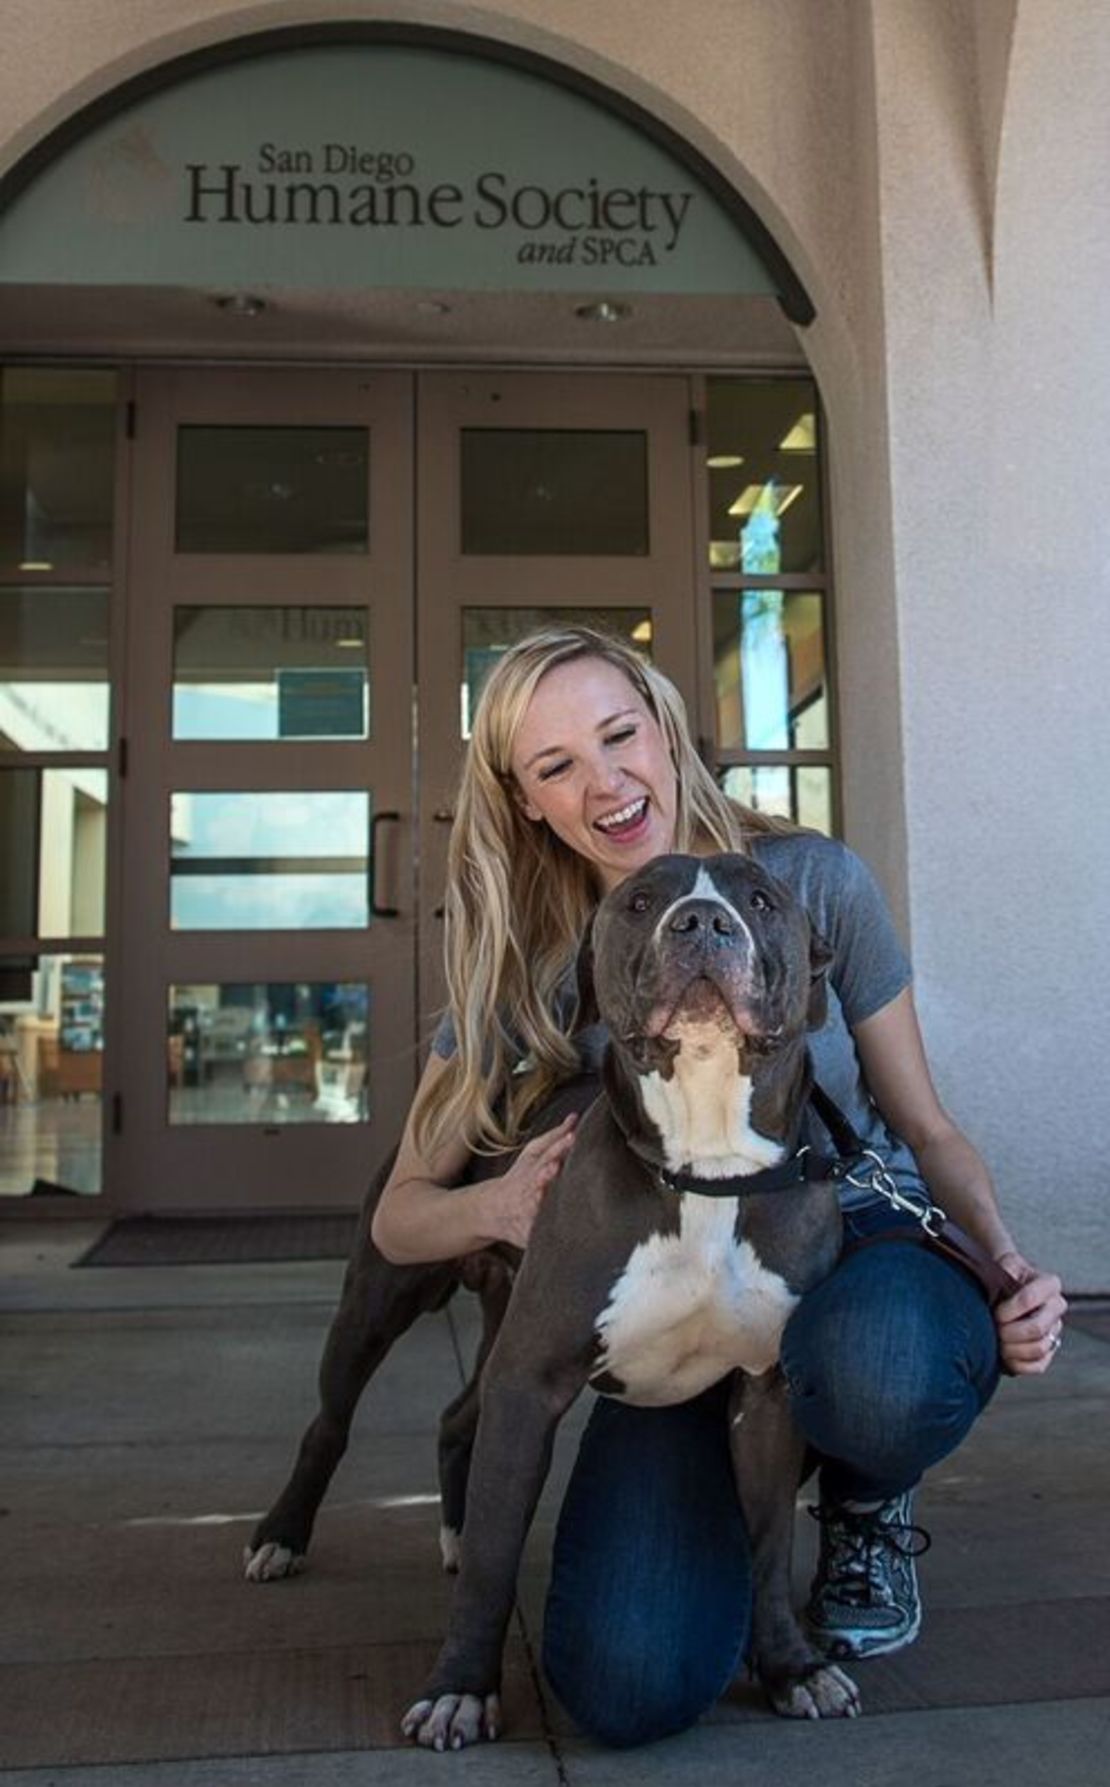 Shannon Kopp says an unexpected and transformative kind of healing took place at the San Diego Humane Society.